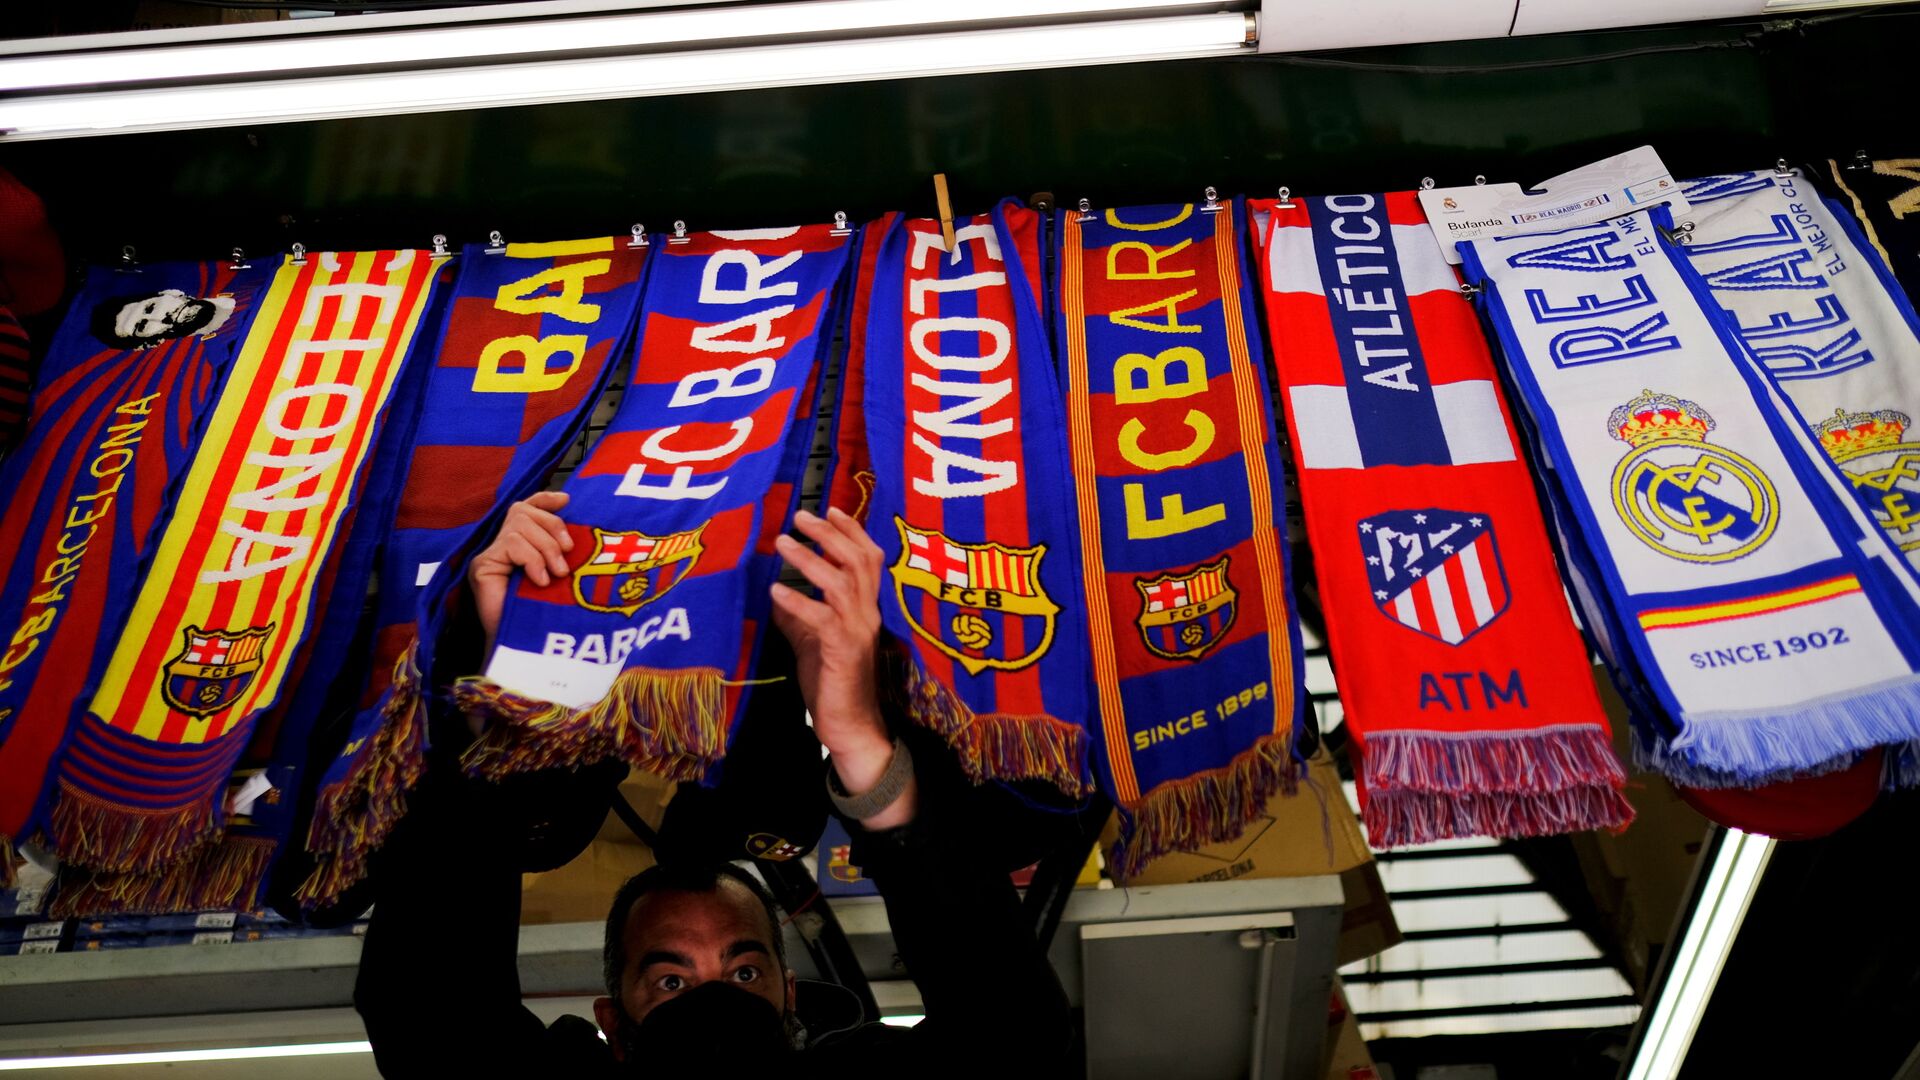 Soccer Football - FC Barcelona, Atletico Madrid and Real Madrid scarves are displayed inside a store at Las Ramblas as twelve of Europe's top football clubs launch a breakaway Super League - Barcelona, Spain - April 19, 2021 - اسپوتنیک افغانستان  , 1920, 26.06.2022